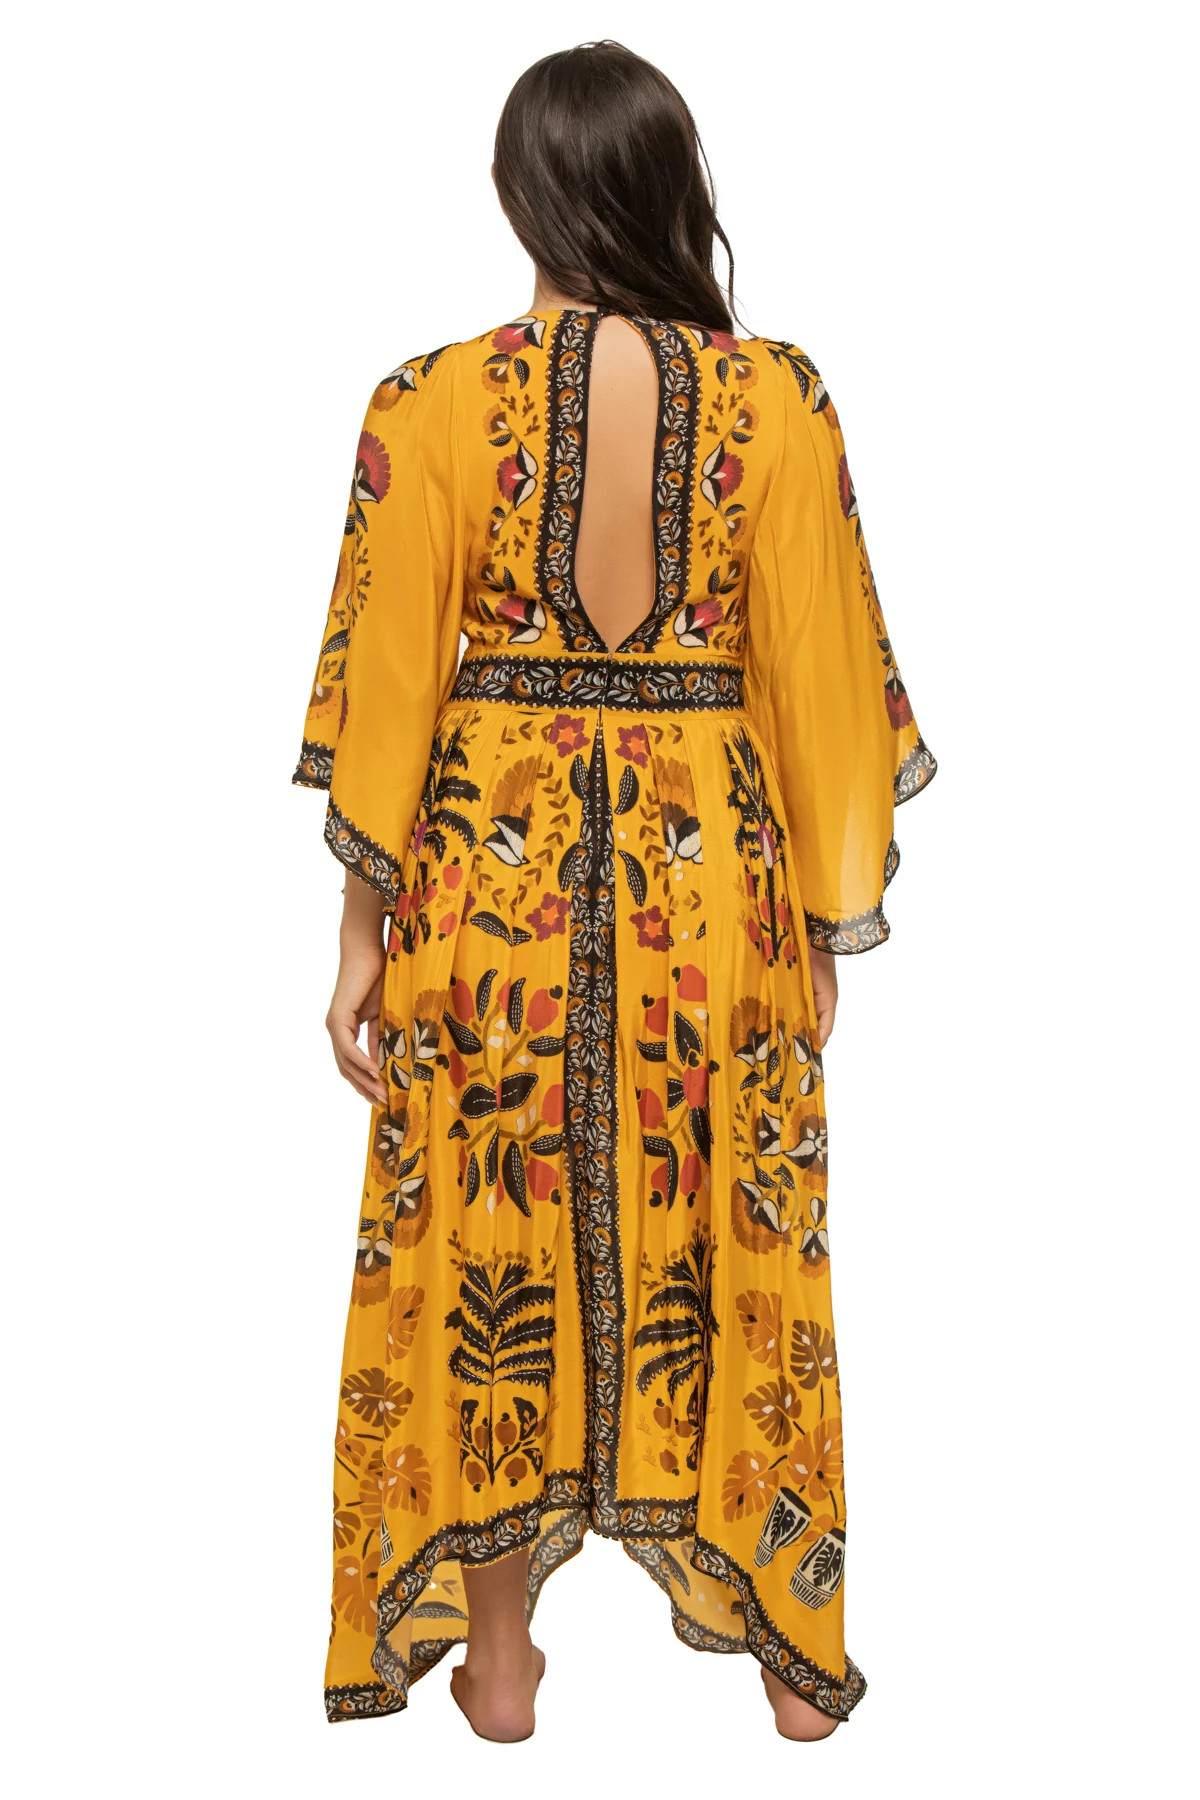 TROPICAL TAPESTRY Tropical Tapestry Caftan Dress image number 2